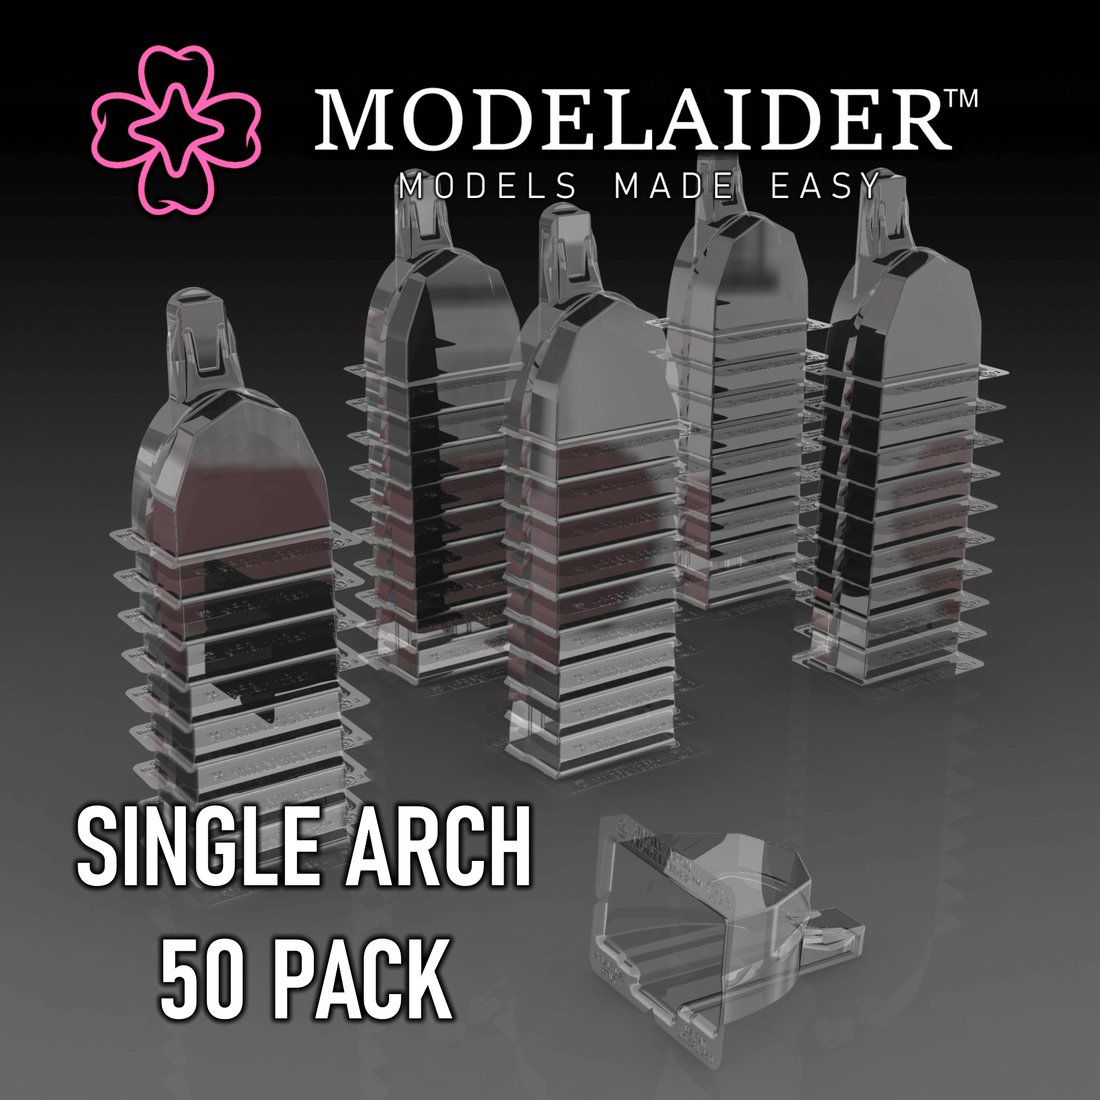 Single Arch Modelaider (SA) Value Pack Fifty(50) - Modelaider